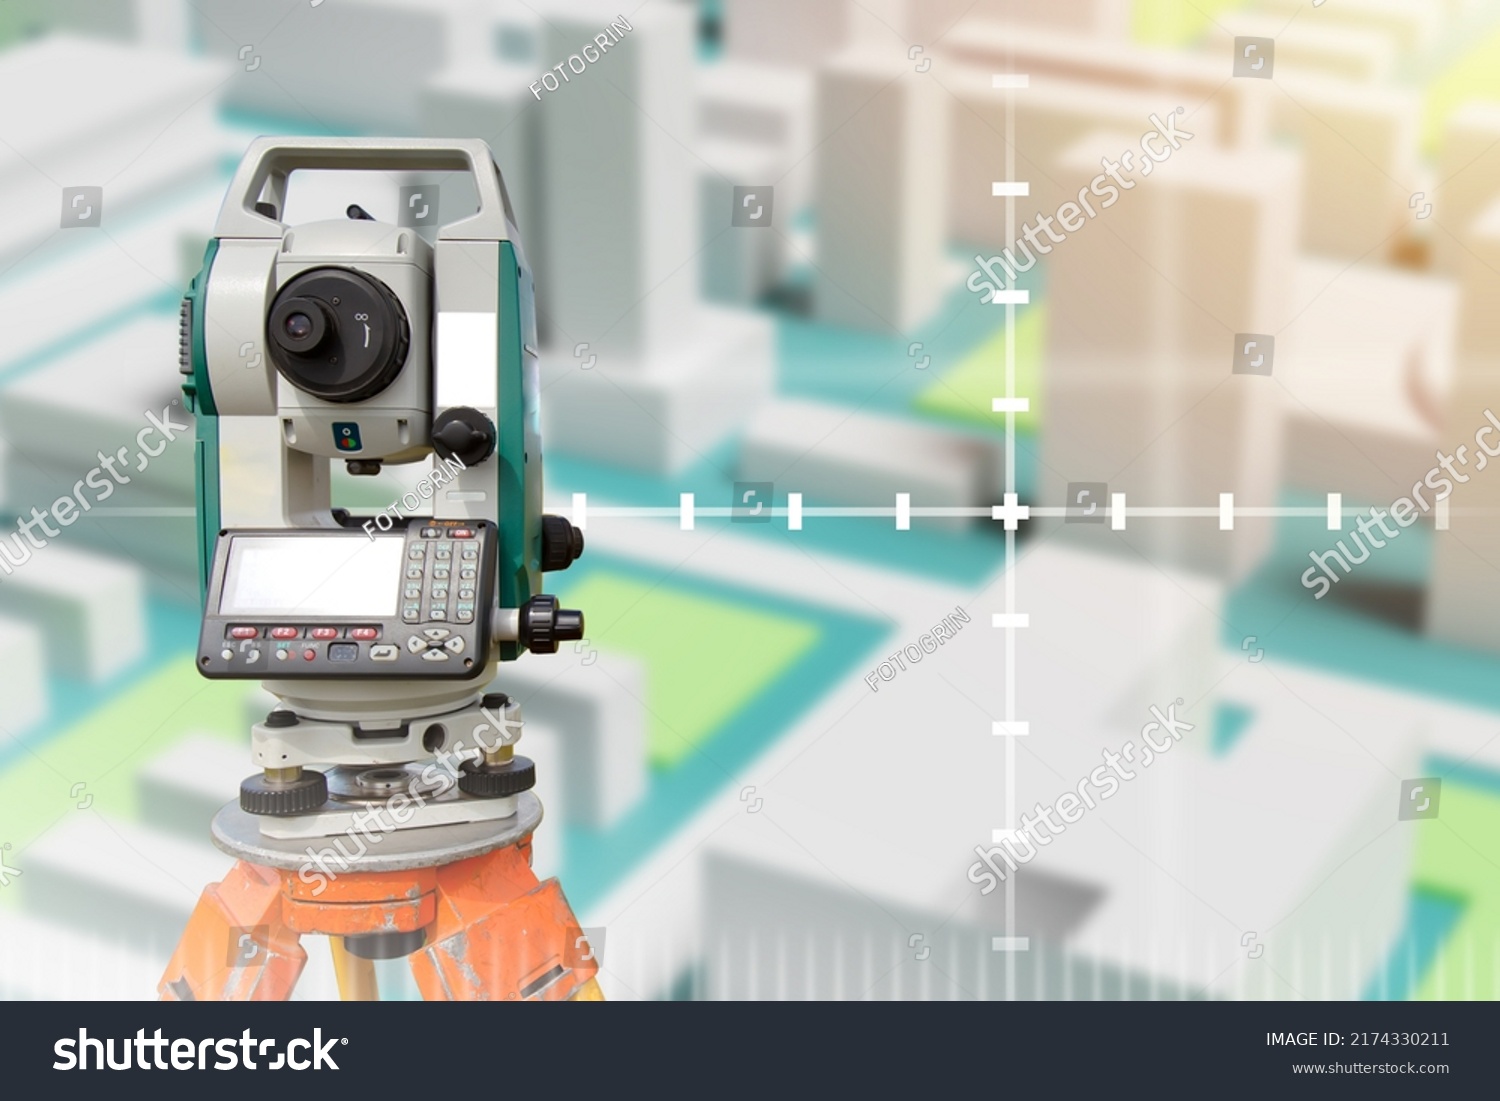 Device for surveyor. Optical theodelite on tripod. Place for text about geodesy. Equipment for topographic maps. Electronic theodelite for surveyor. Surveyor devise front blurred town. #2174330211